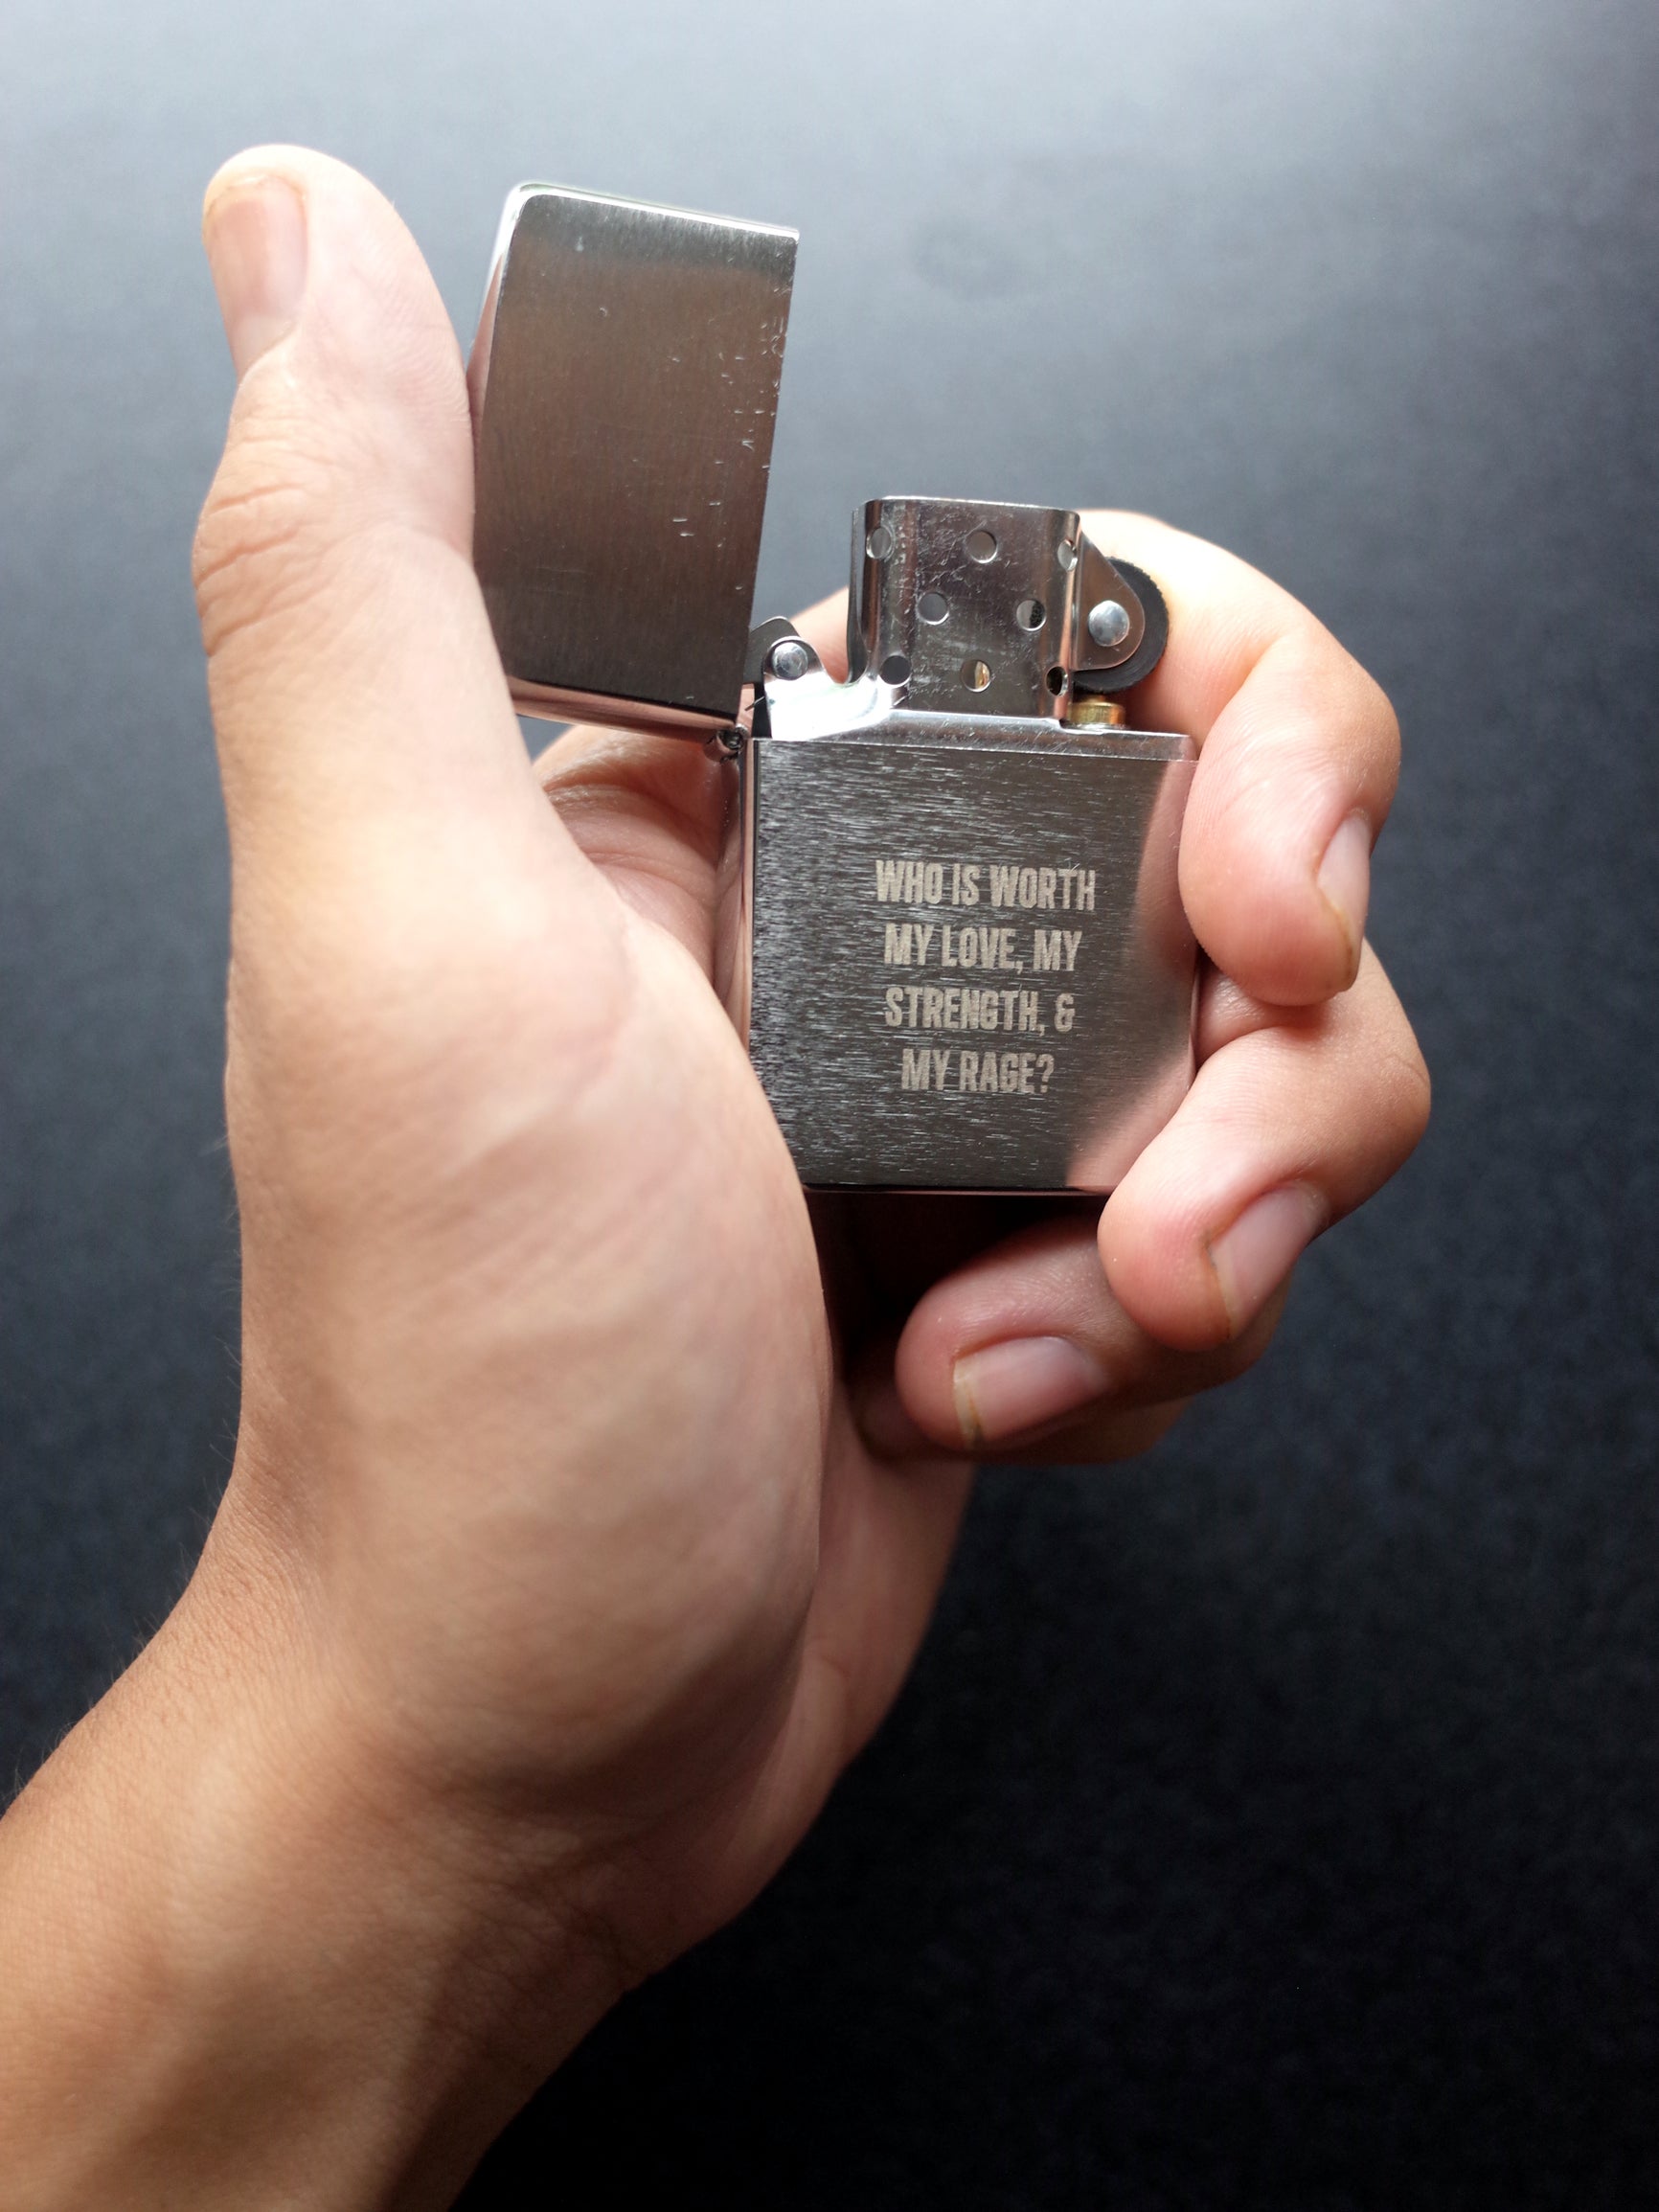 A hand holding an open Zippo style lighter with the engraving "WHO IS WORTH MY LOVE, MY STRENGTH, & MY RAGE?"